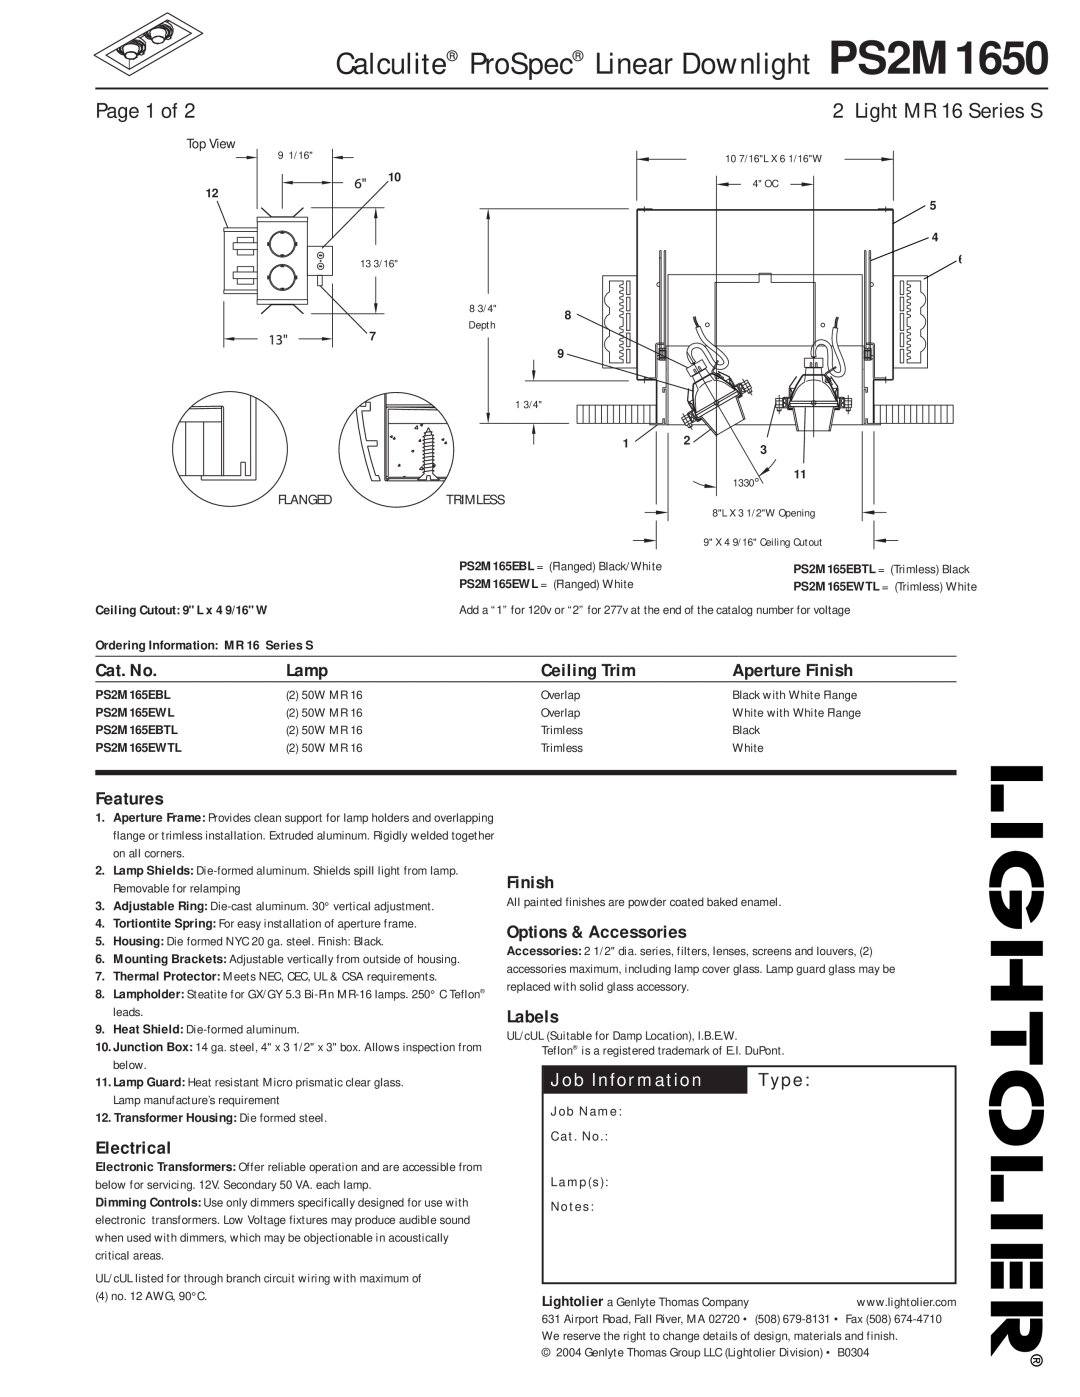 Lightolier manual Calculite ProSpec Linear Downlight PS2M1650, Page 1 of, Light MR 16 Series S, Cat. No, Lamp, Features 